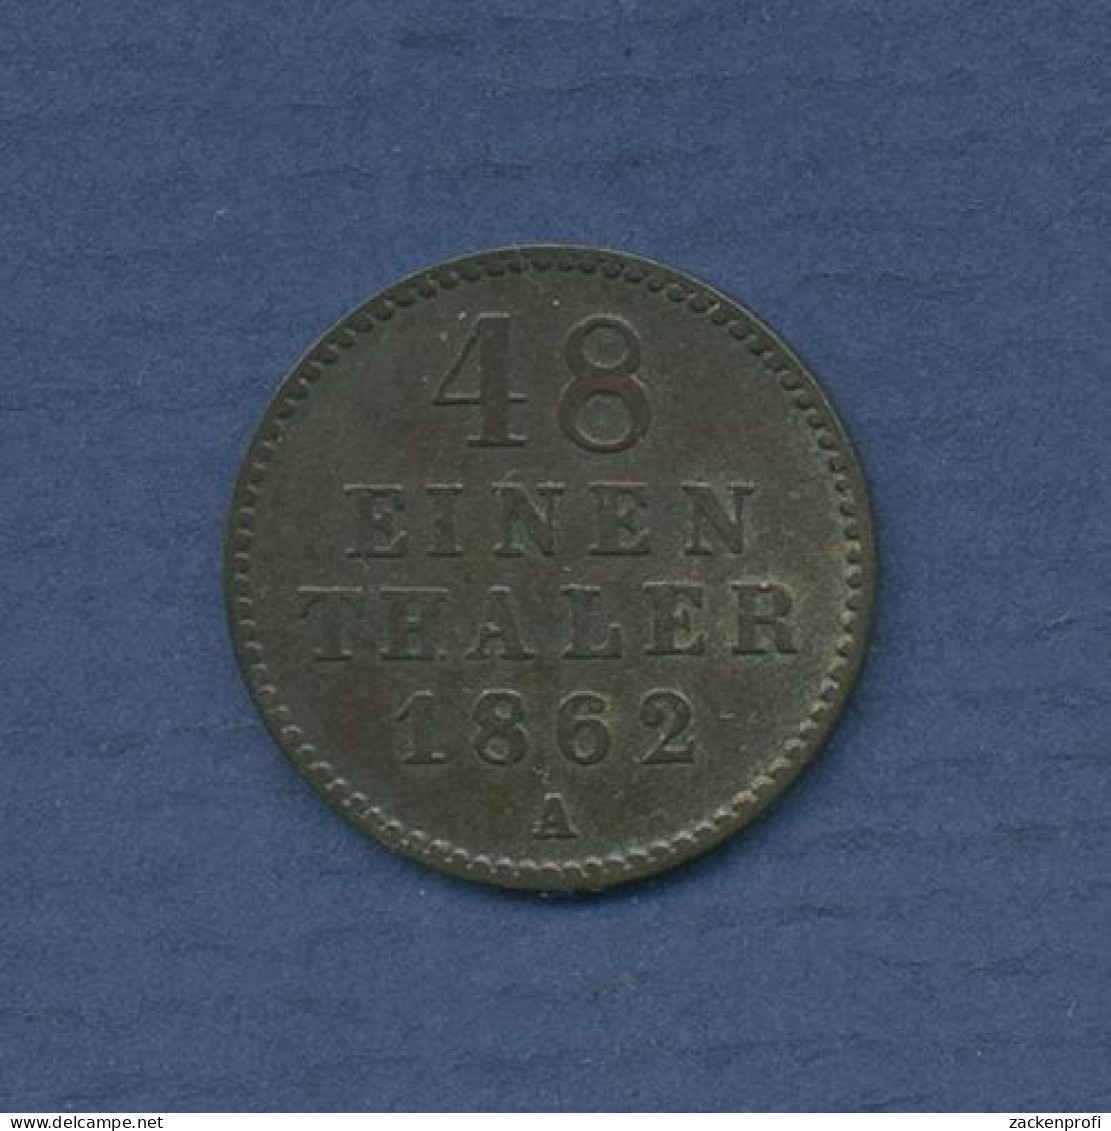 Mecklenburg-Strelitz 1/48 Taler 1862 A, Friedrich Wilhelm, J 119 Ss+ (m3686) - Small Coins & Other Subdivisions